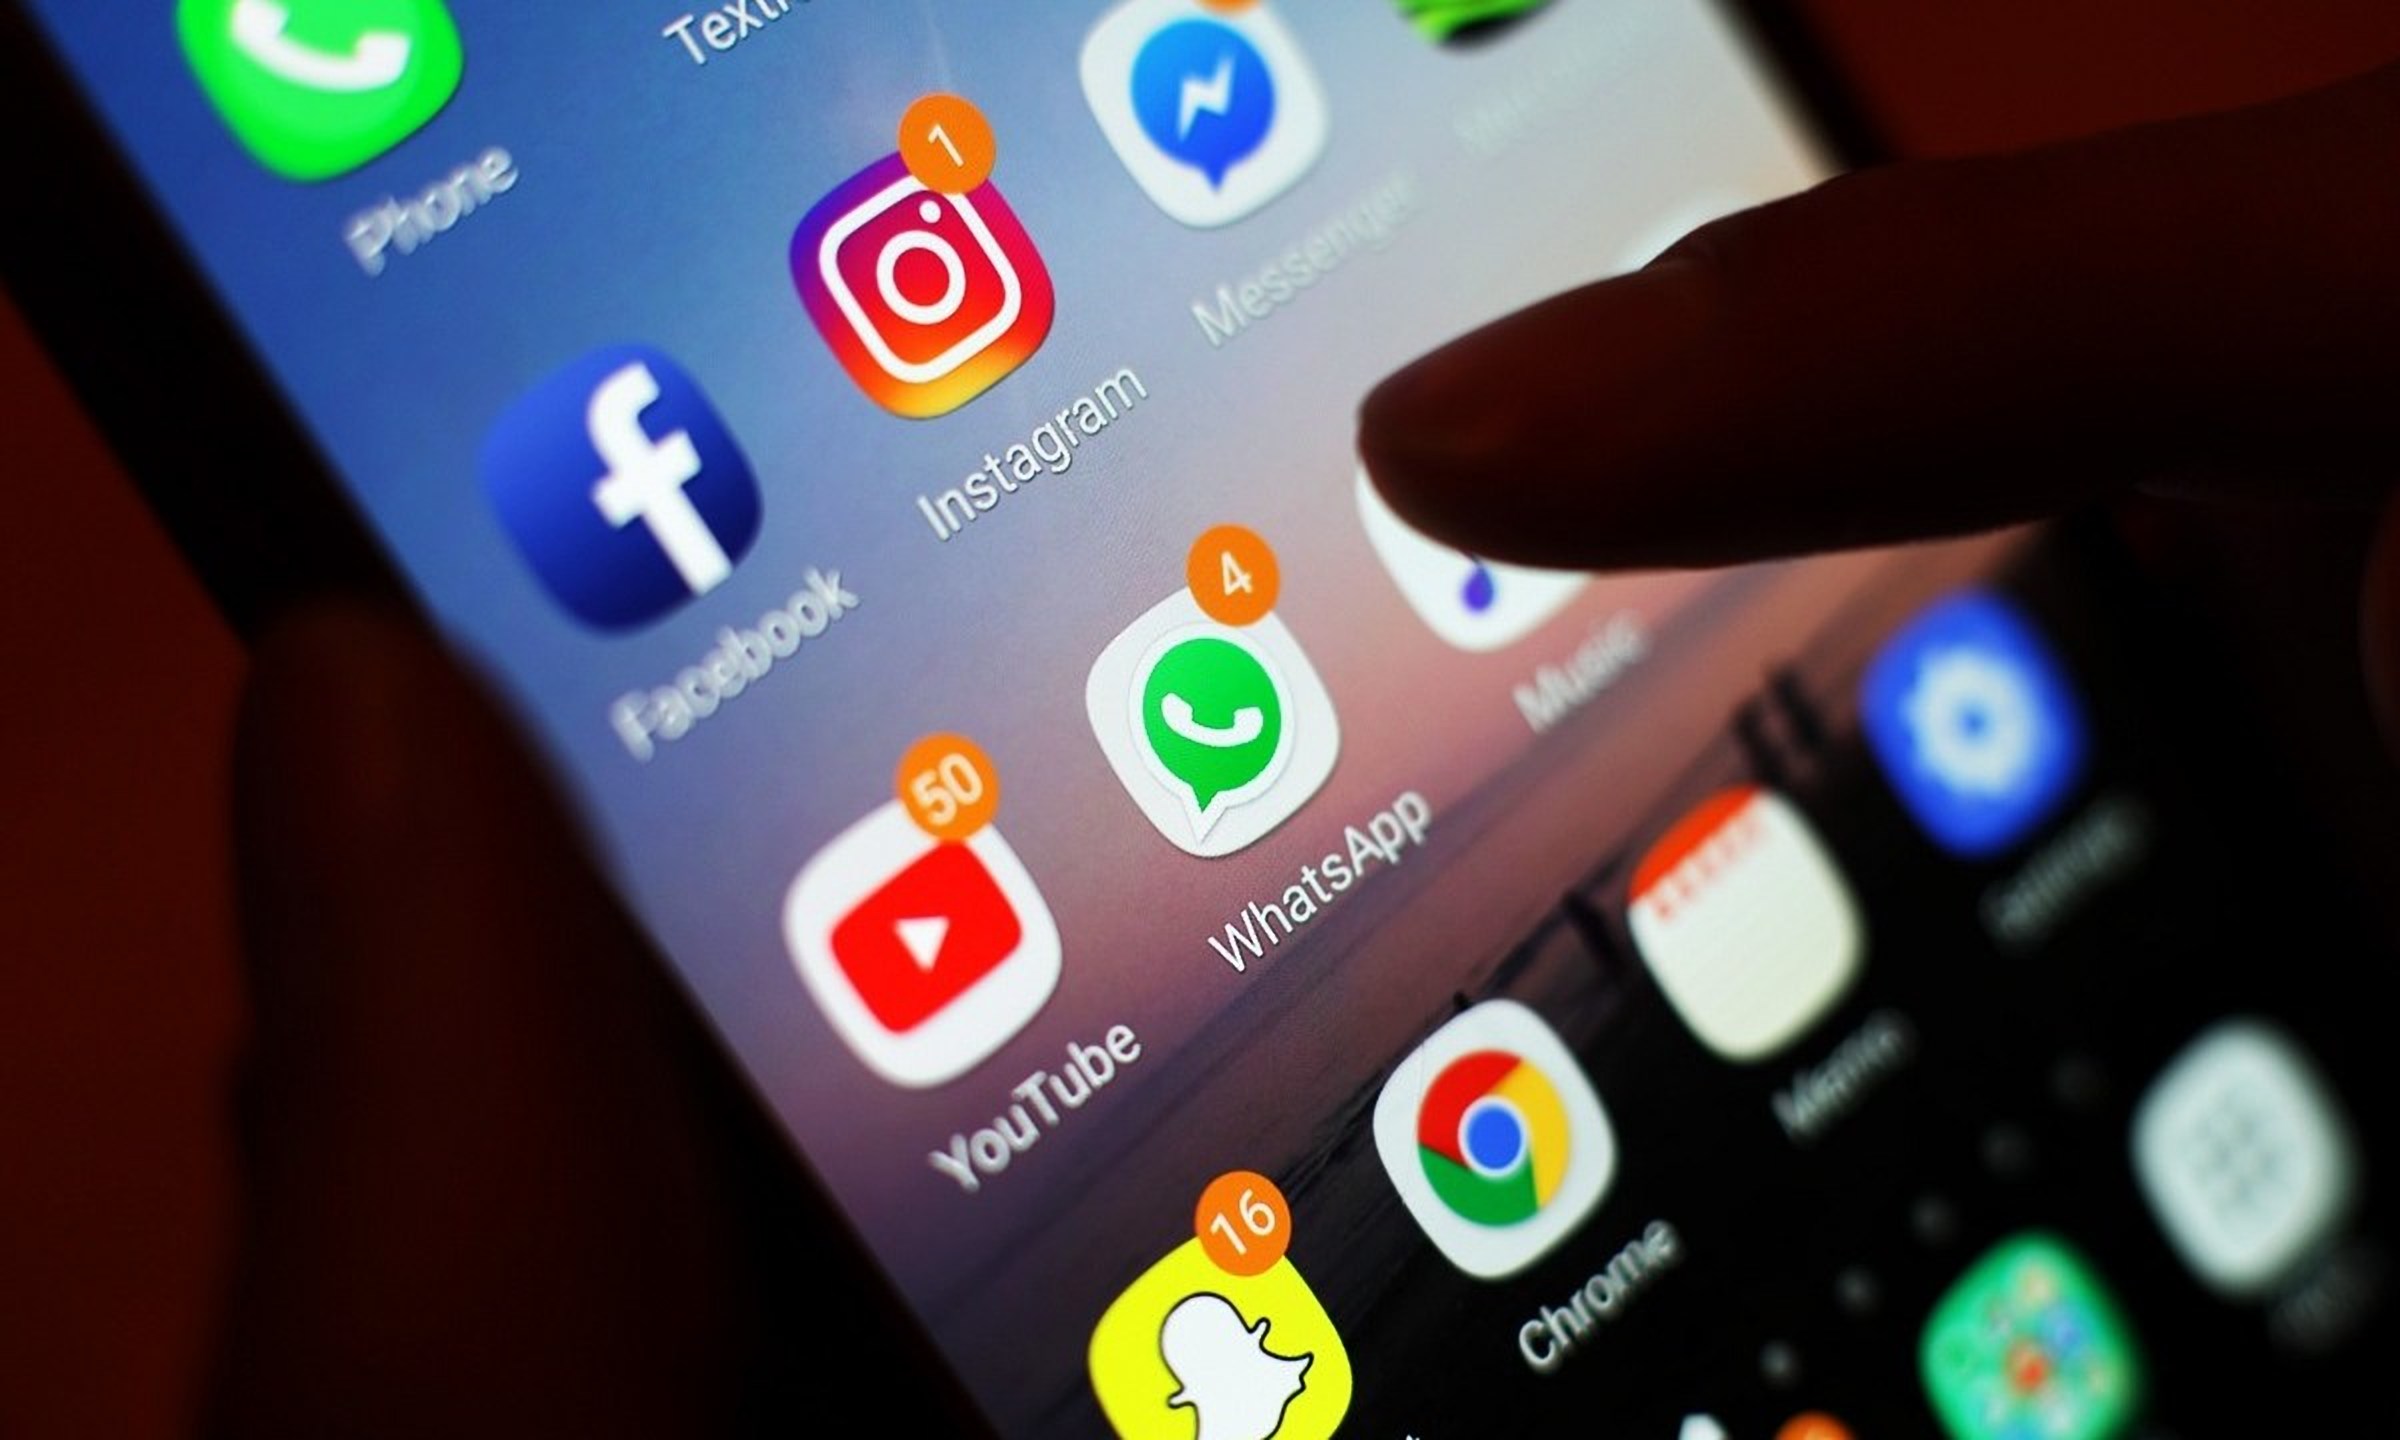 Posting ‘rumours’ on social media could land you in Tanzania jail